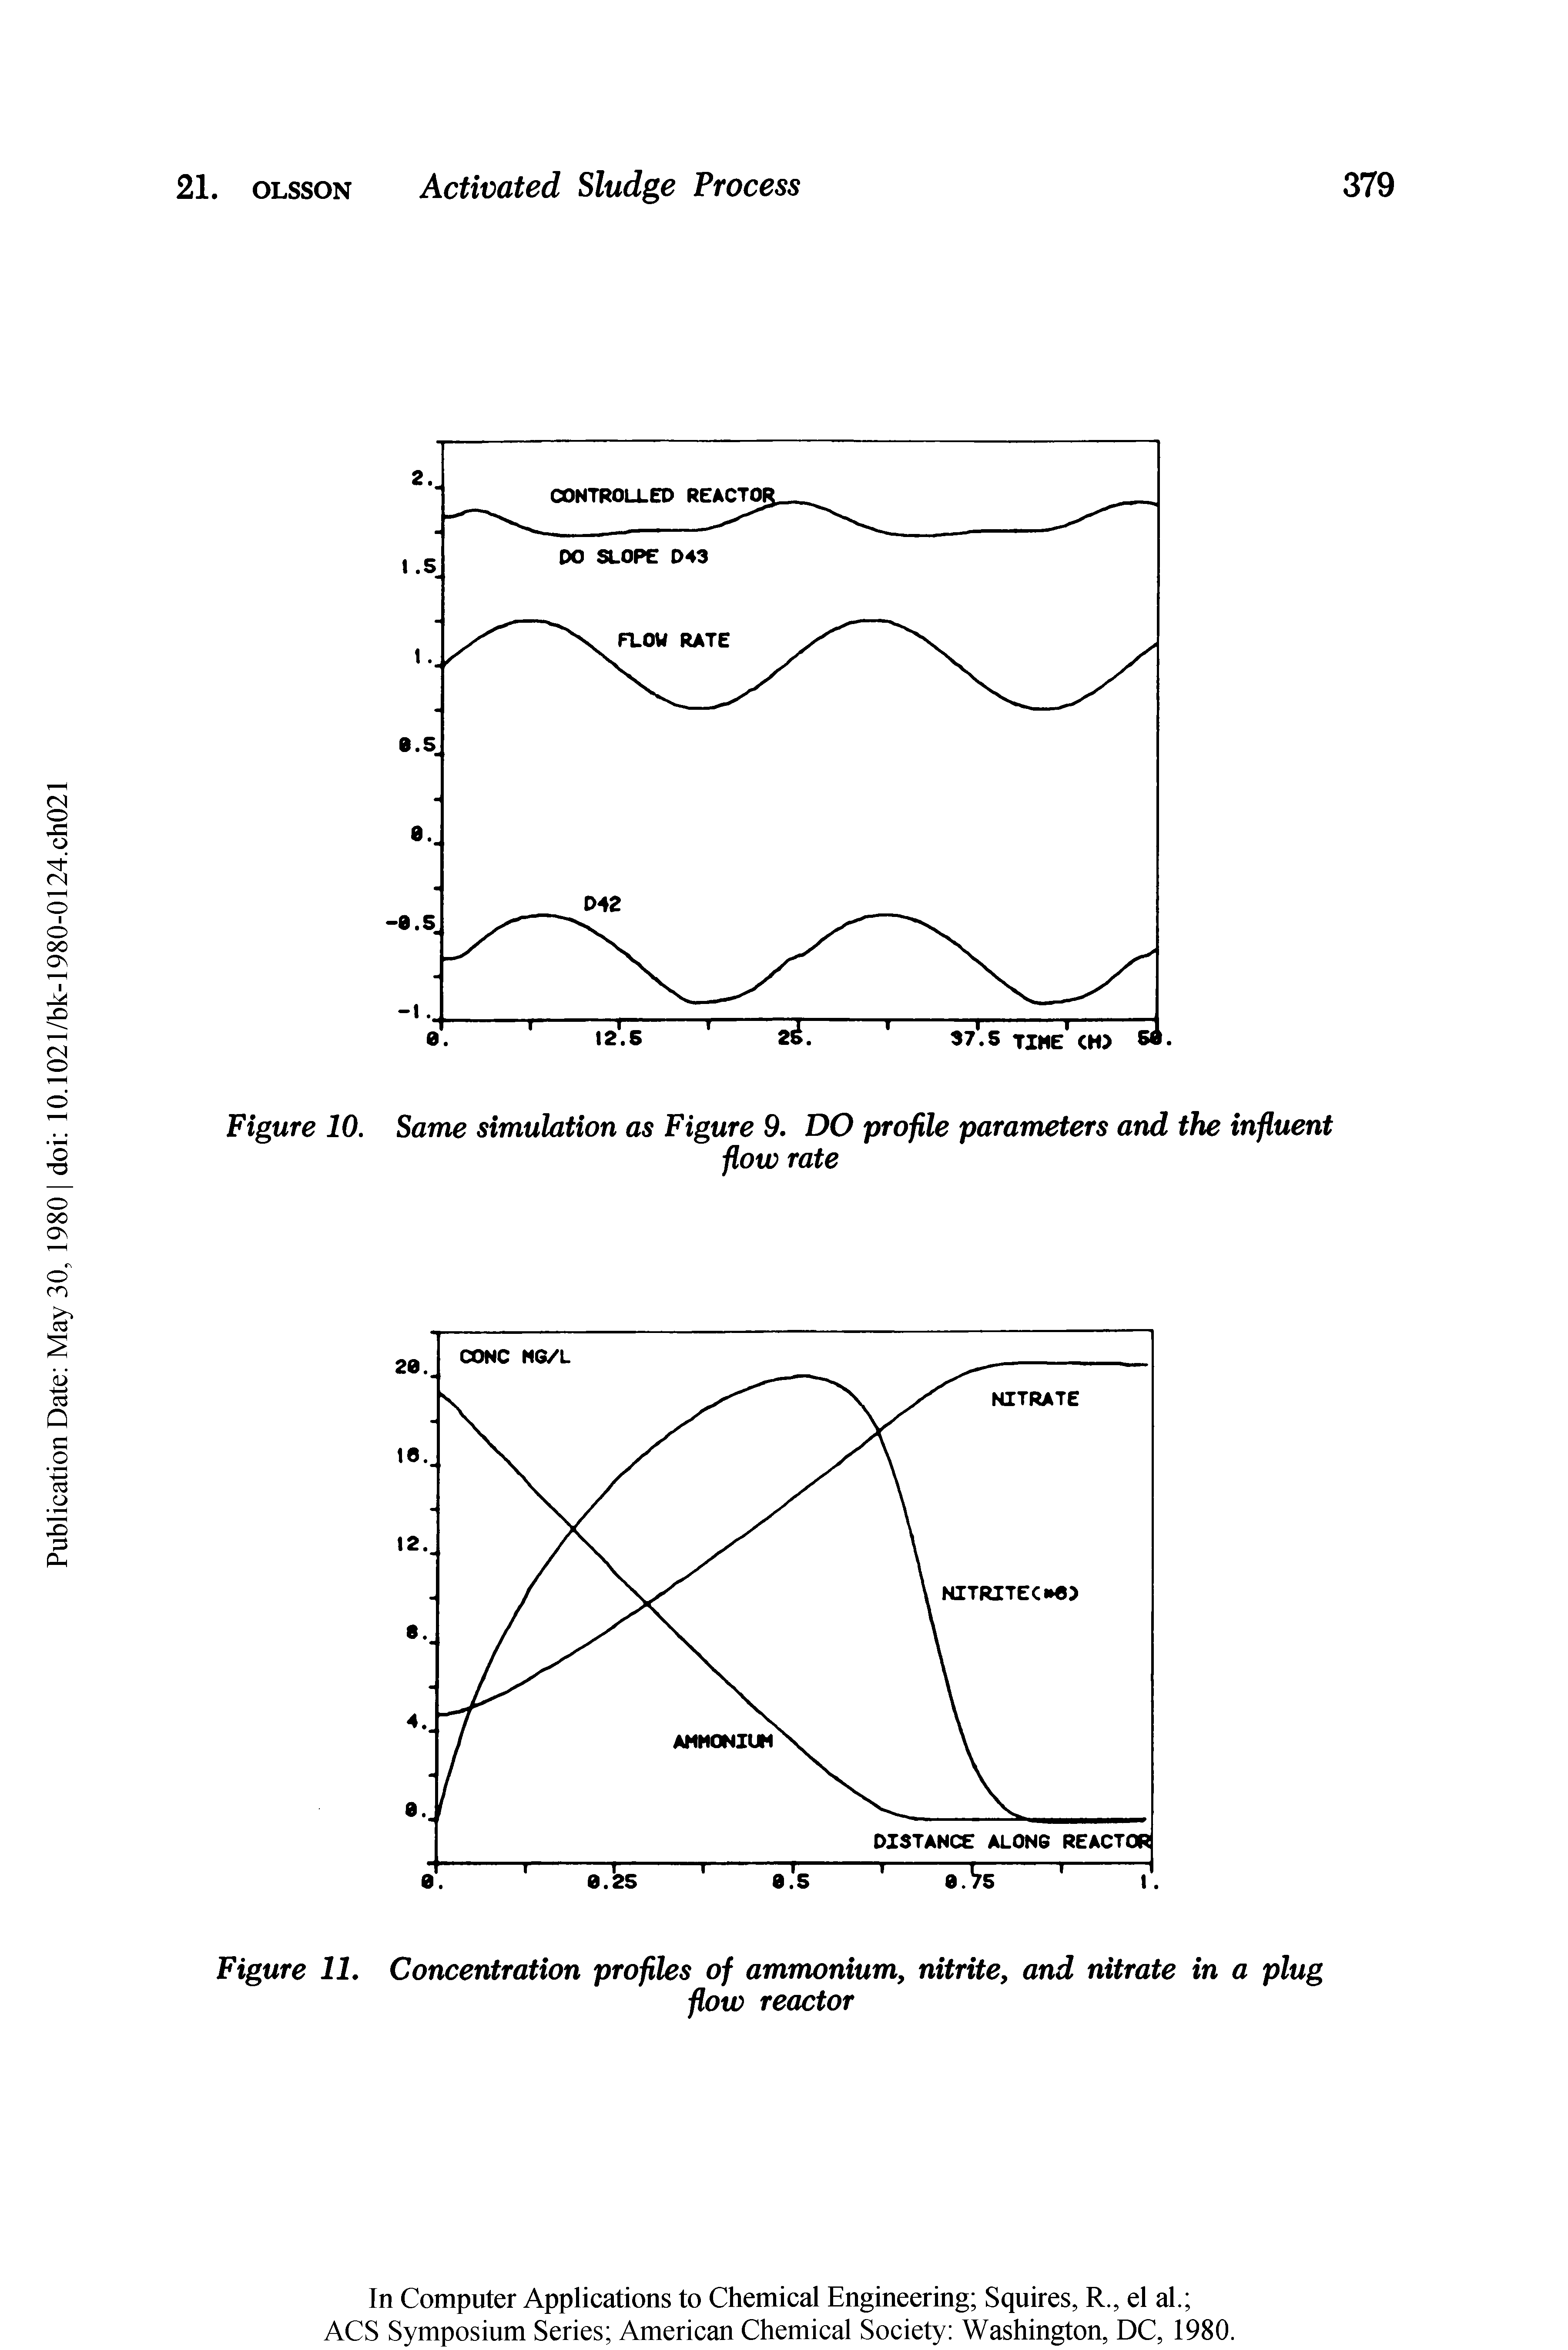 Figure 11, Concentration profiles of ammonium, nitrite, and nitrate in a plug...